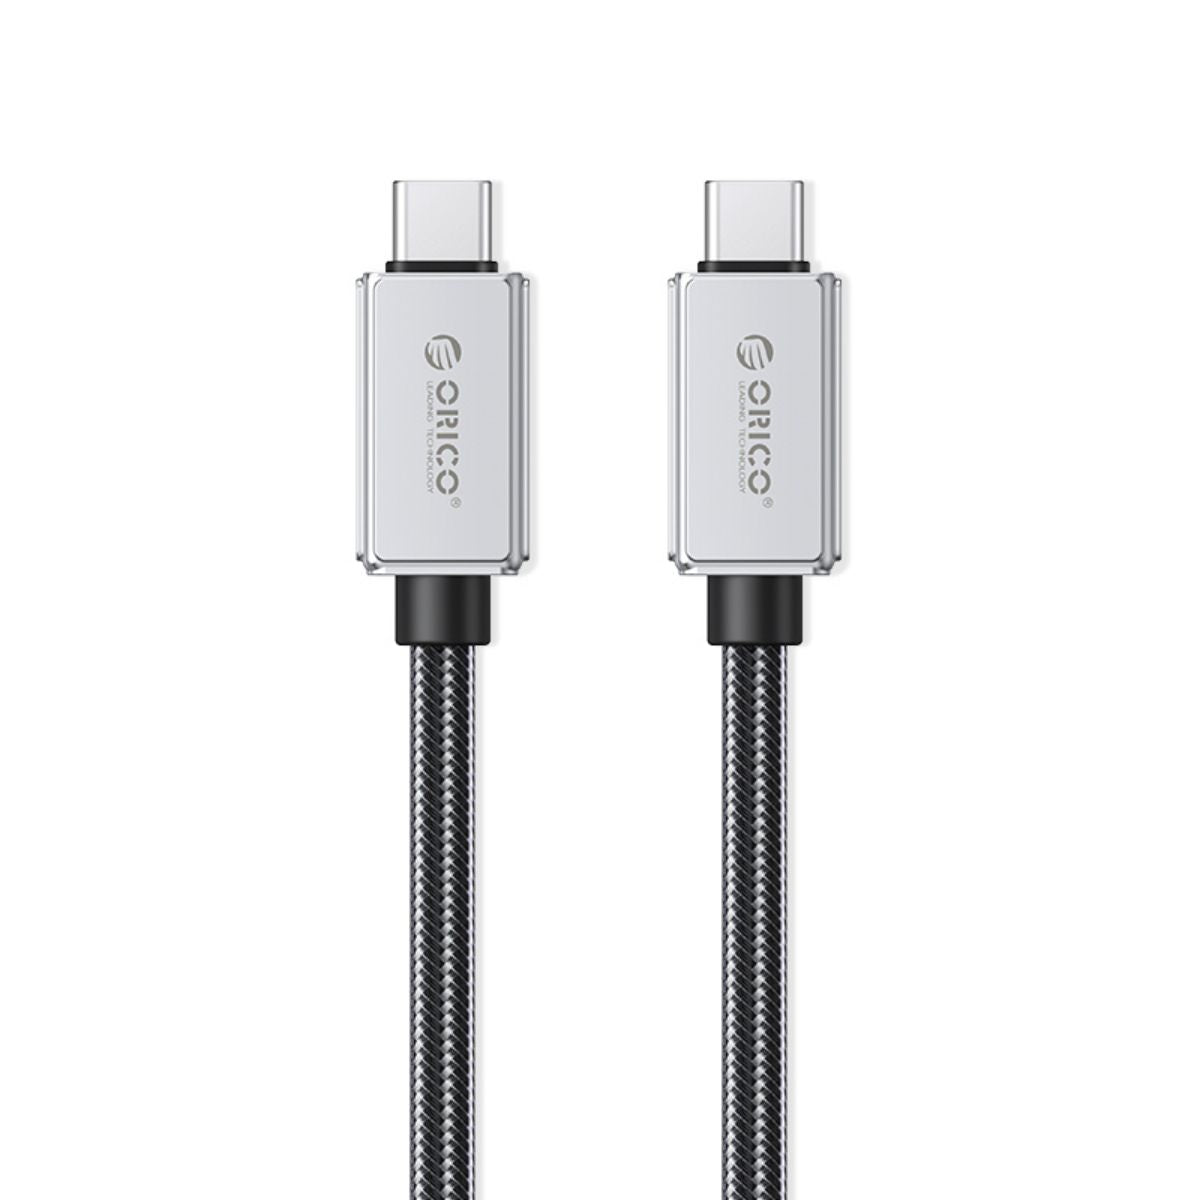 ORICO PD 240W 20Gbps USB 3.2 Gen2 Type C Fast Charging Data Cable 0.5M / 1M / 2M with 4K 60Hz UHD Video Output & Intelligent Chip for iPhone 15 iPad MacBook Samsung Galaxy Tab Xiaomi Mi Smartphone Tablet Laptop Monitor Camera | 240A3-20